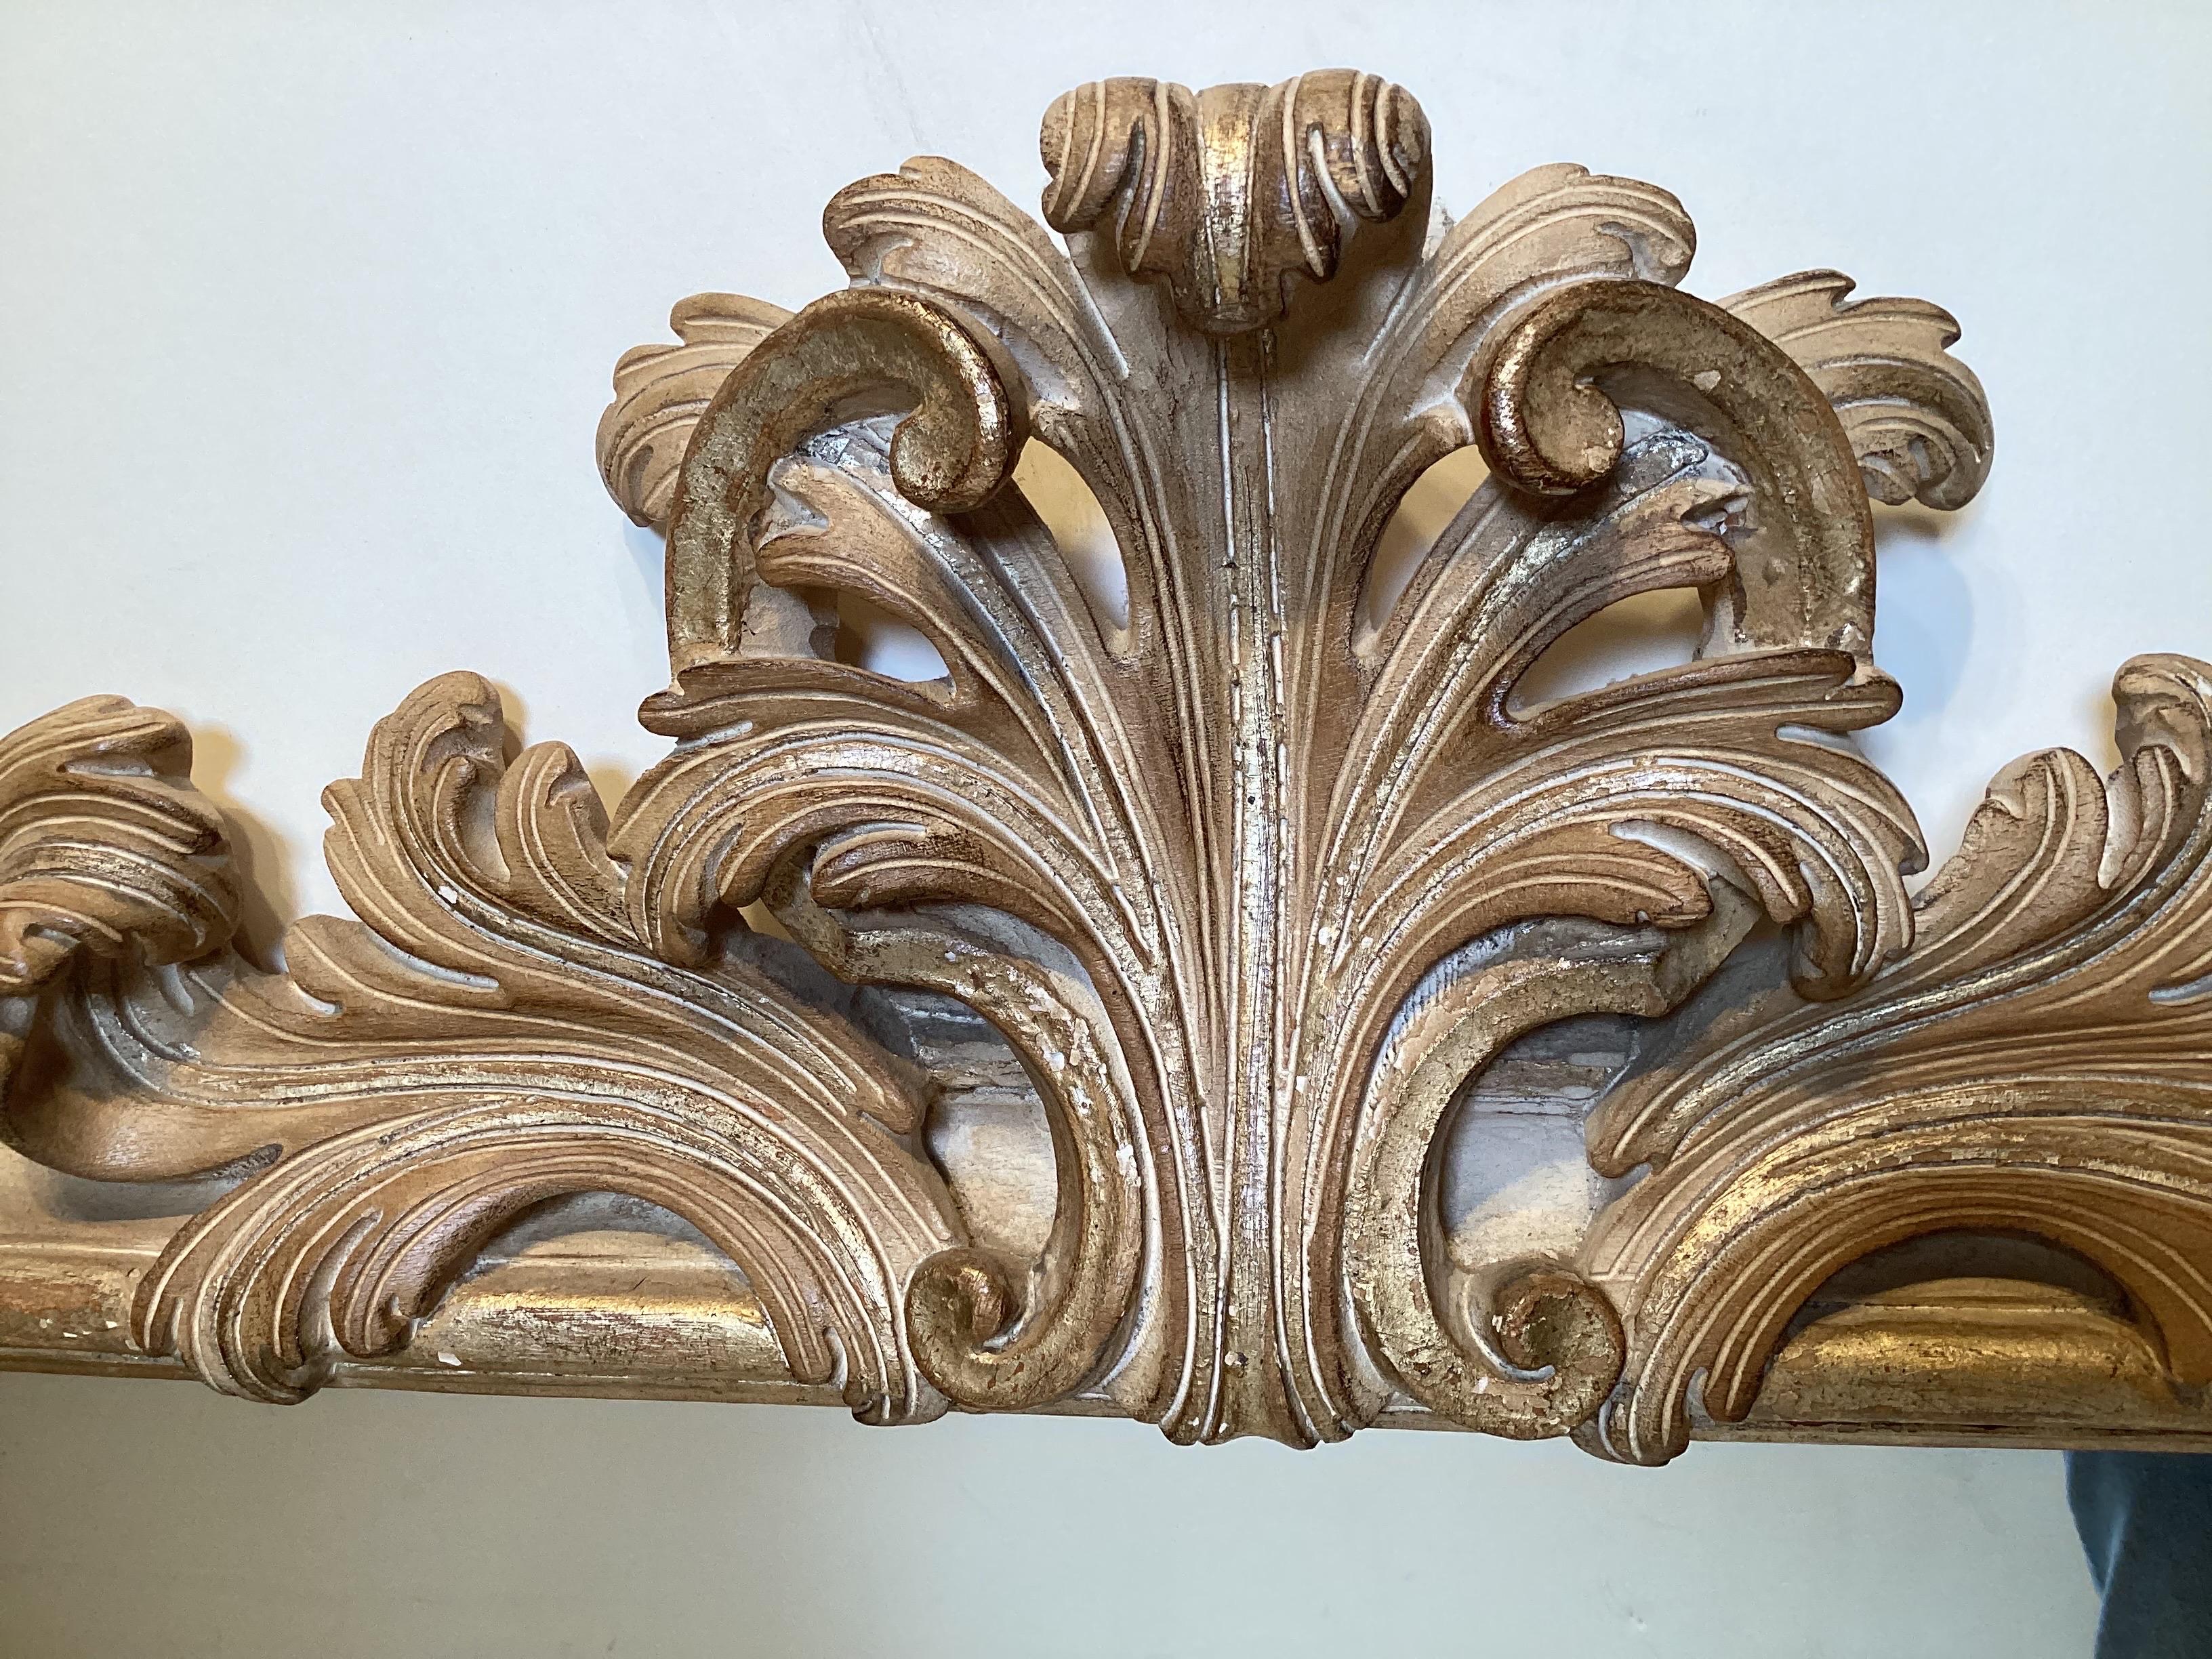 Hand carved Rococo style wood mirror. The wood frame with a light wash of gilding with mostly wood showing through. The plume top with scrolling at the corners in a thick detailed frame.